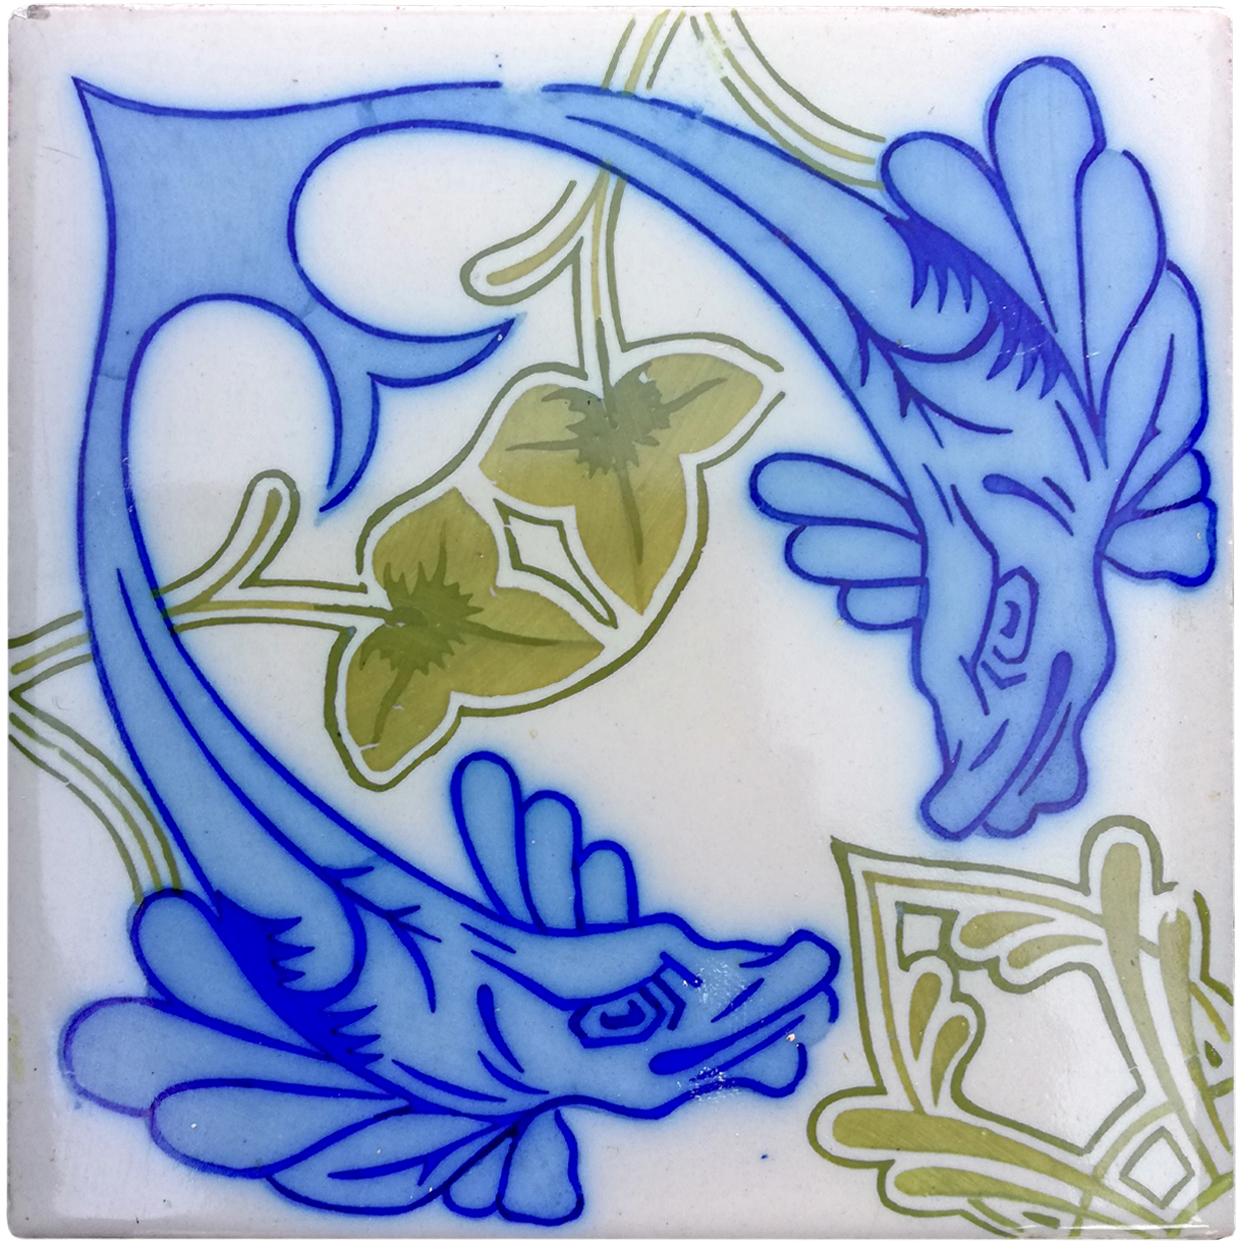 34 pcs. Exceptional antique wall tiles, white with cobalt blue and moss green image of a fish (Onda, Spain Valencia). 
The dimensions per tile are 5.9inch (15 cm) × 5.9 inch (15 cm). Also available 10 edge tiles 5.9 inch (15 cm) × 2.3 inch (7.5 cm)